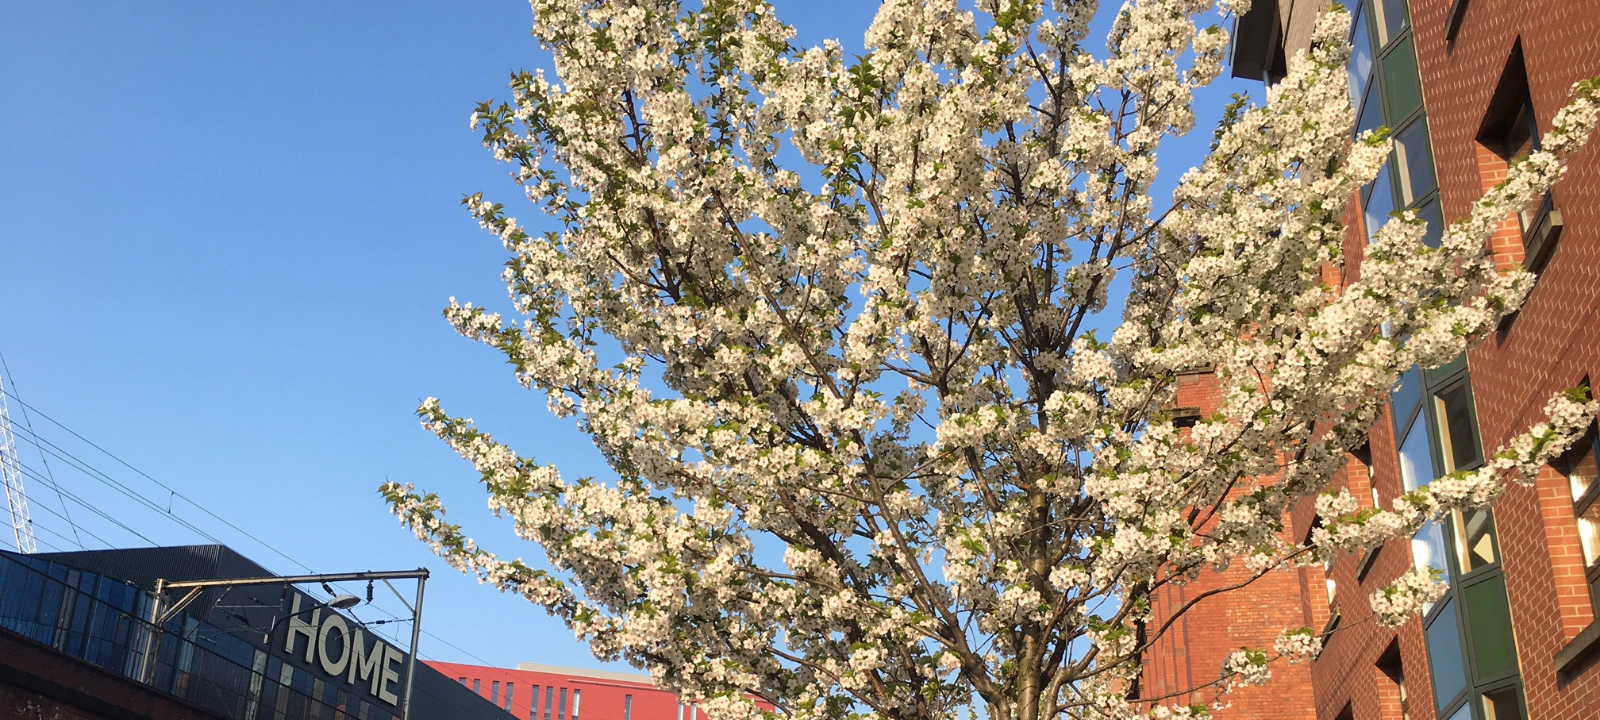 blossom tree in central manchester